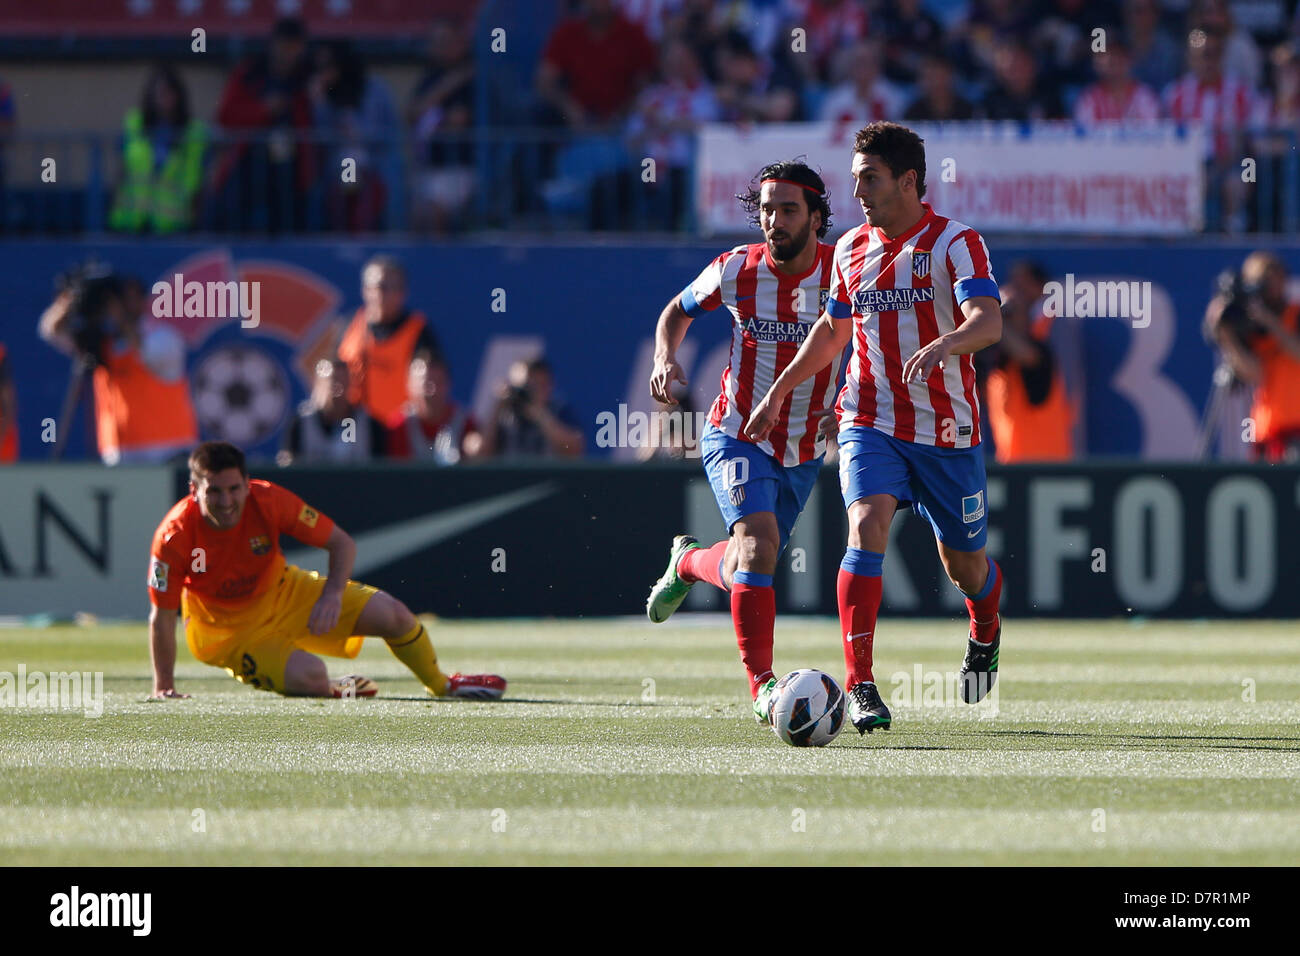 Madrid, Spain. 12th May 2013. Atletico de Madrid versus F.C. Barcelona (1-2) at Vicente Calderon stadium. The picture shows Jorge Resurreccion Koke (Spanish midfielder of At. Madrid). Credit: Action Plus Sports Images/Alamy Live News Stock Photo